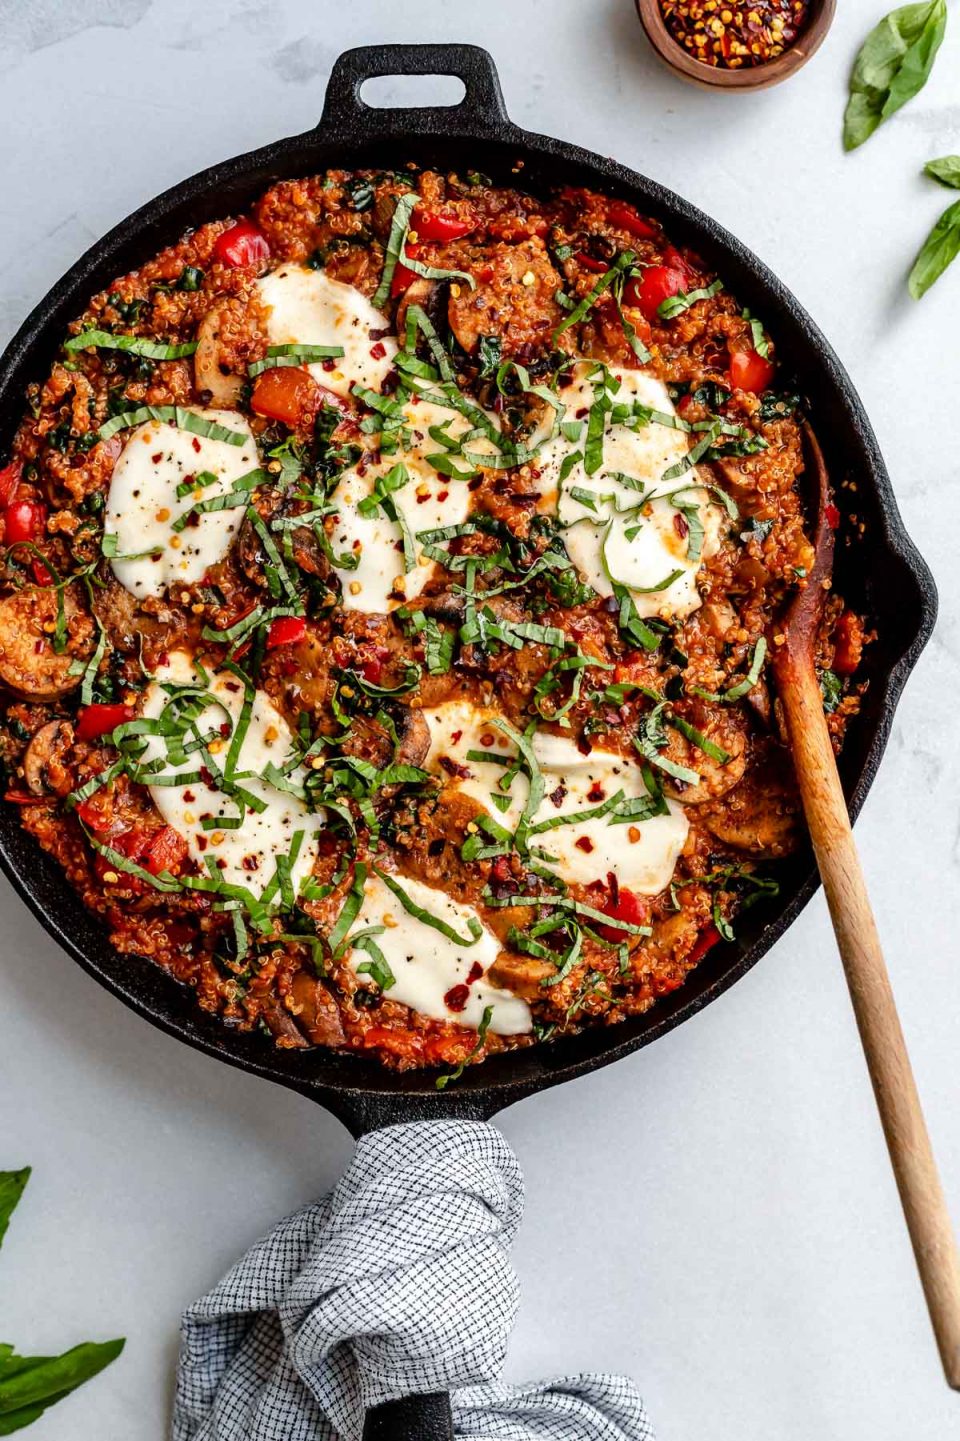 An overhead shot of a finished Italian chicken sausage and quinoa skillet fills a large black cast iron skillet that sits atop a creamy white textured surface. Melted fresh mozzarella tops the skillet dinner with crushed red chili flakes, thinly sliced basil, and grated parmesan used for garnish. A small wooden pinch bowl filled with crushed red chili flakes and loose fresh basil leaves surround the skillet. A blue and white plaid linen napkin is tied around the skillet handle and a wooden serving spoon rests inside of the skillet.